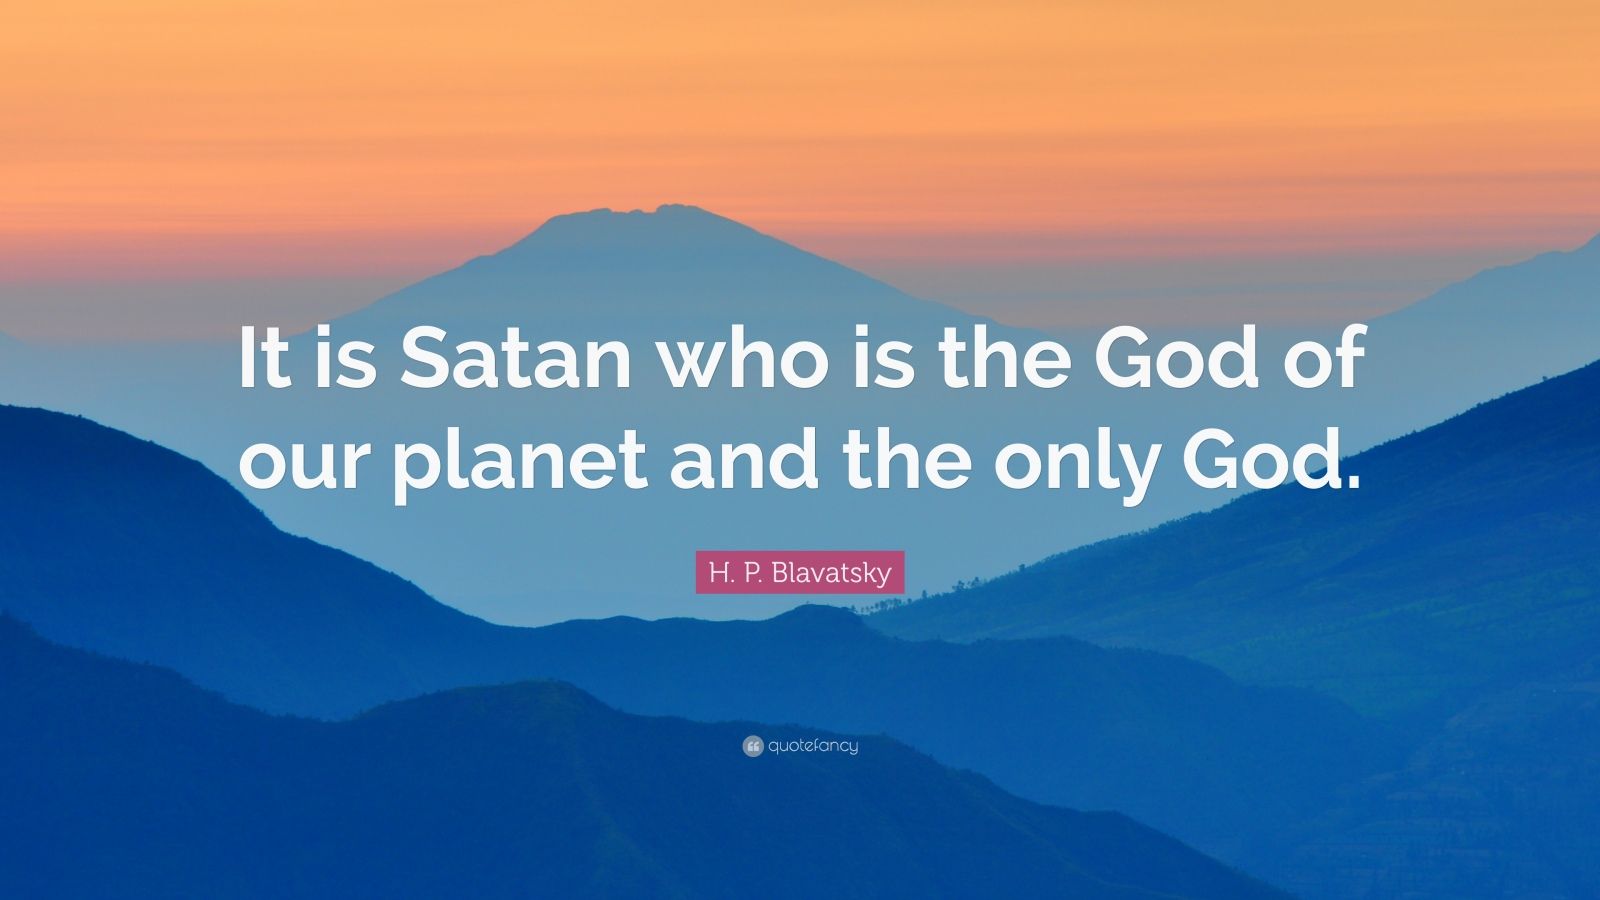 H. P. Blavatsky Quote: “It is Satan who is the God of our planet and